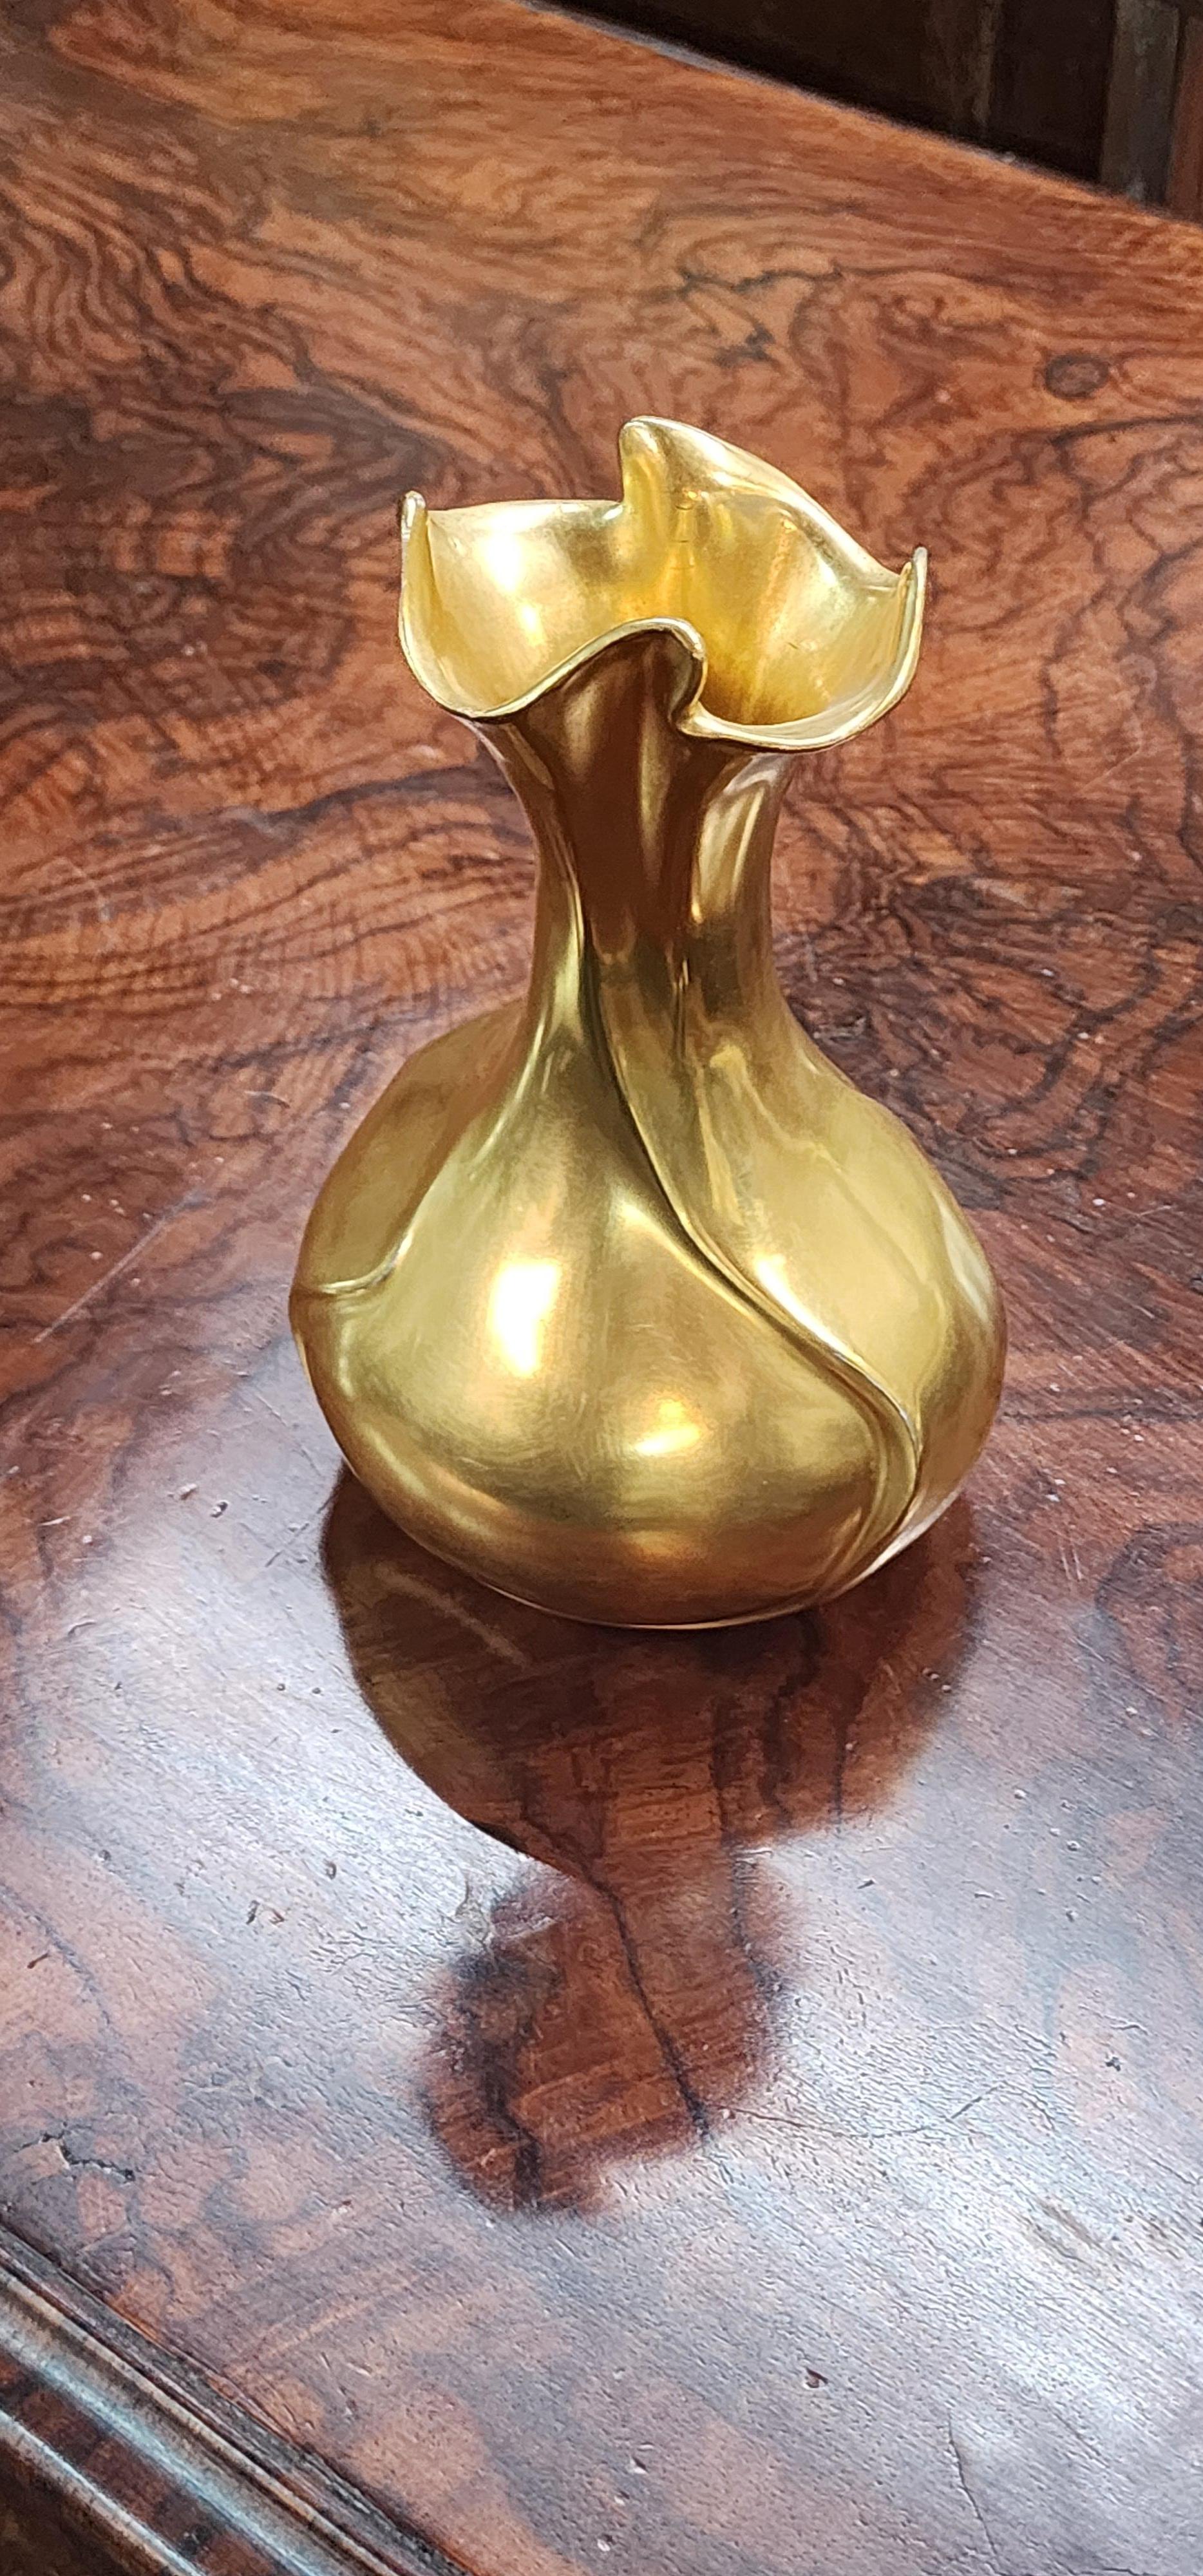  Art Nouveau style vase in gold porcelain with flowing swirled shape wrapping around to bulb base and up to flared top. Circa 1910 